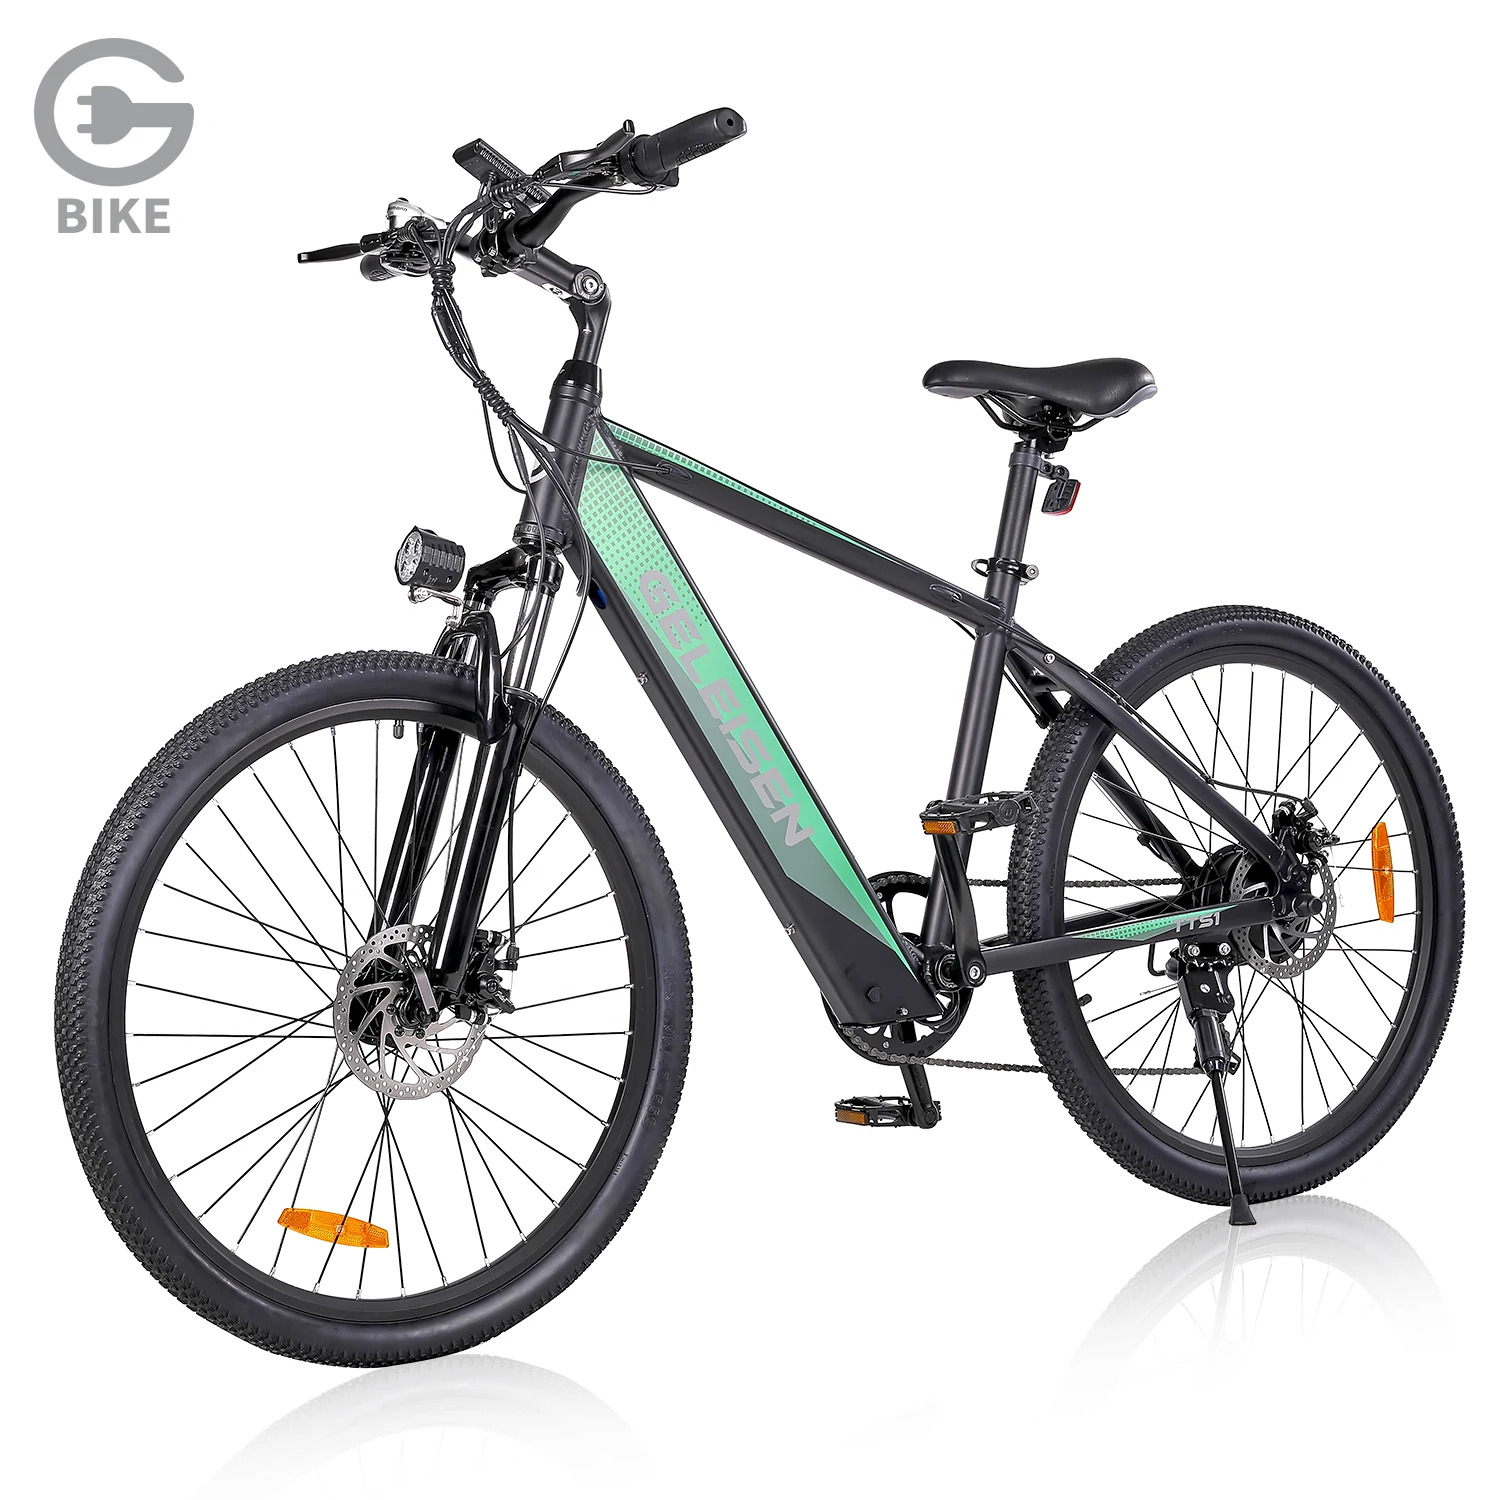 

GELEISEN EU US Warehouse Drop Shipping Electric City Bike 26 Inch Ebike 350W Removable Battery Electric Bicycle, Green